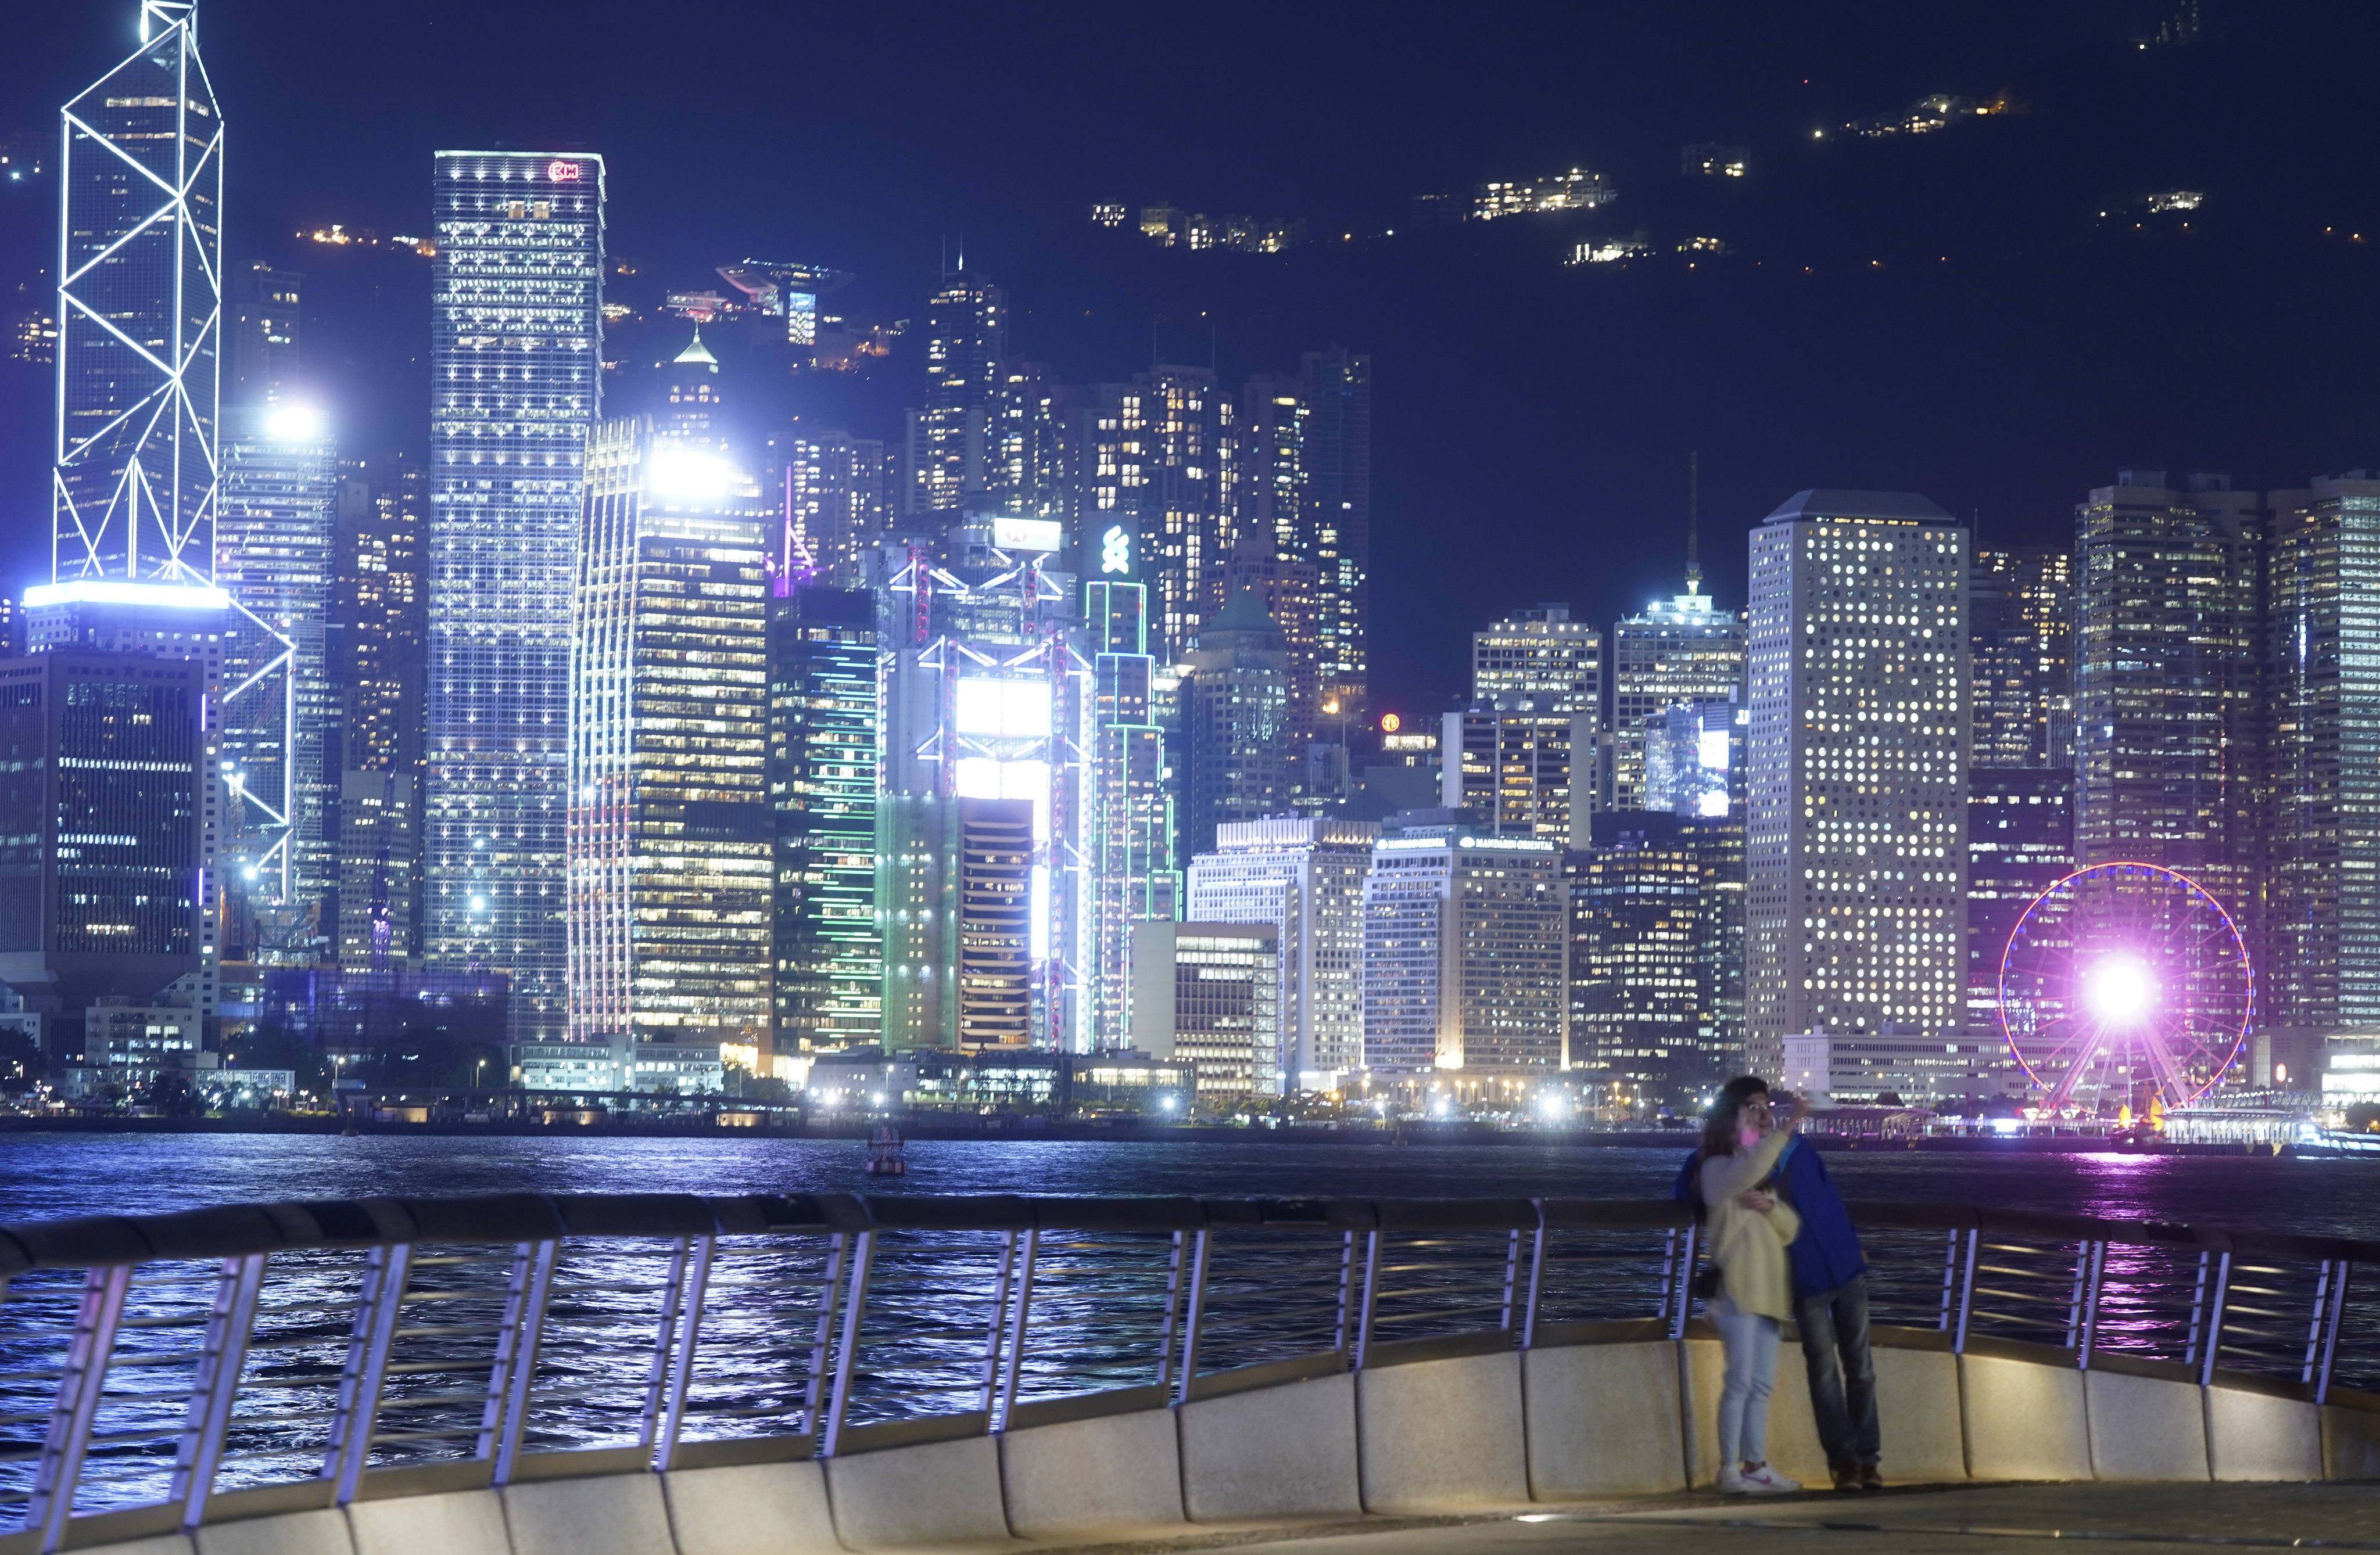 Hong Kong consumers will pay more for electricity as suppliers raise fees. Photo: Sam Tsang